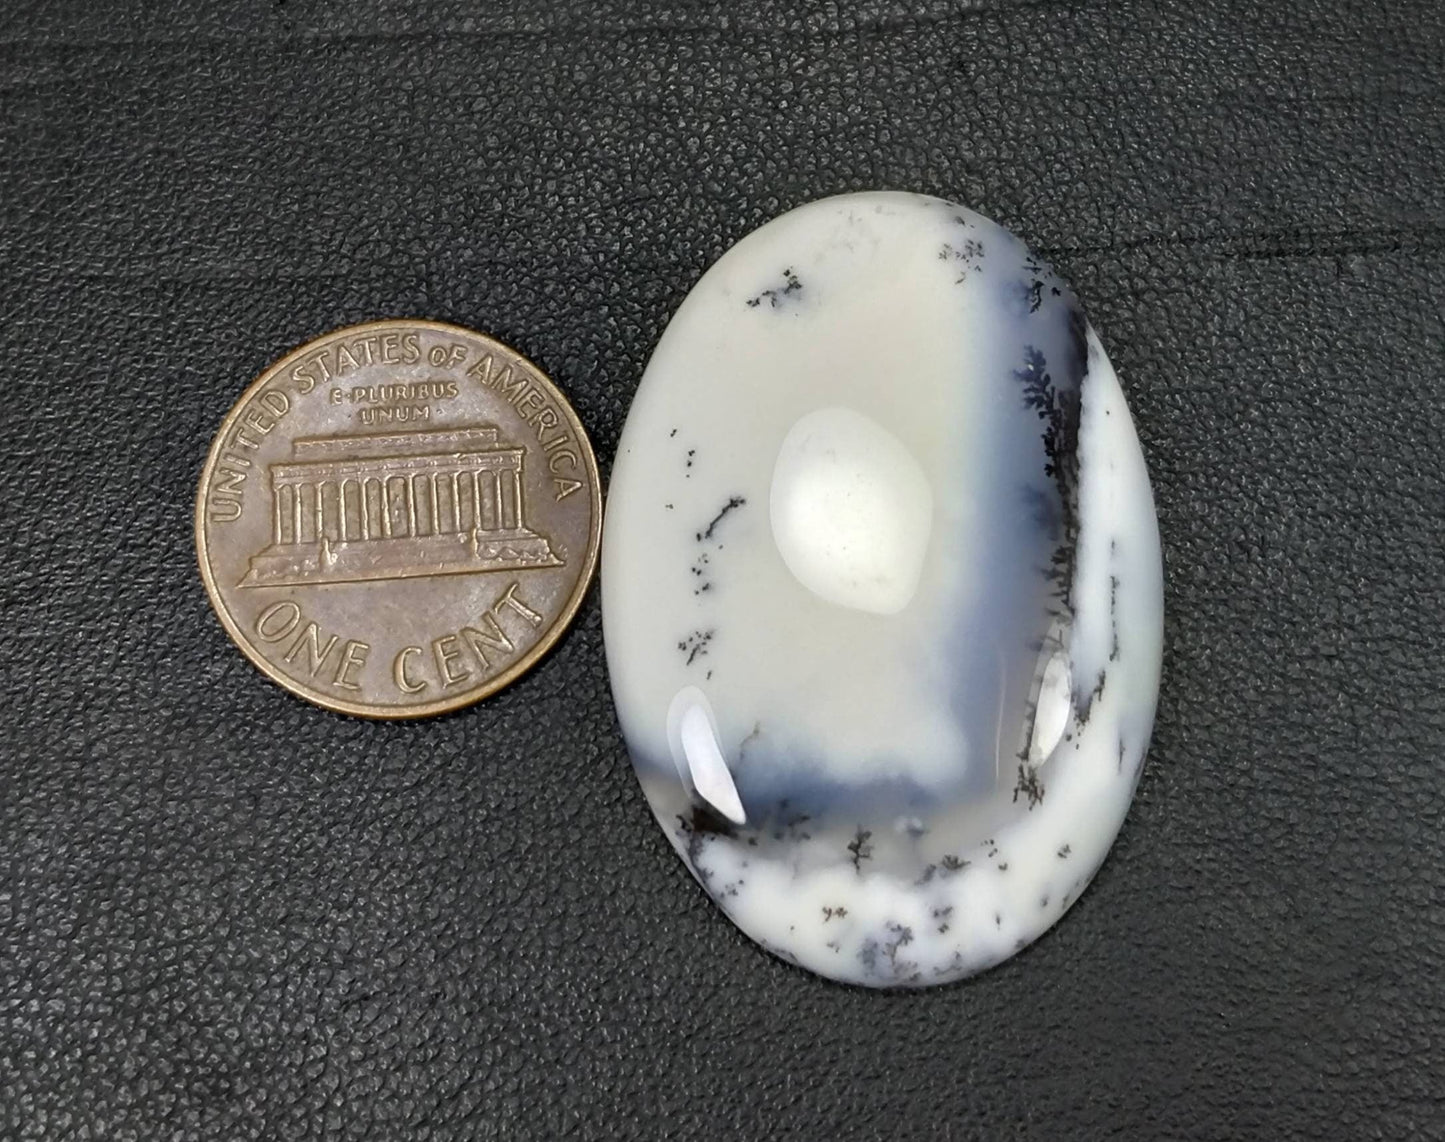 ARSAA GEMS AND MINERALSNatural good quality beautiful Oval shape 44 carats dendritic opal cabochon - Premium  from ARSAA GEMS AND MINERALS - Just $15.00! Shop now at ARSAA GEMS AND MINERALS